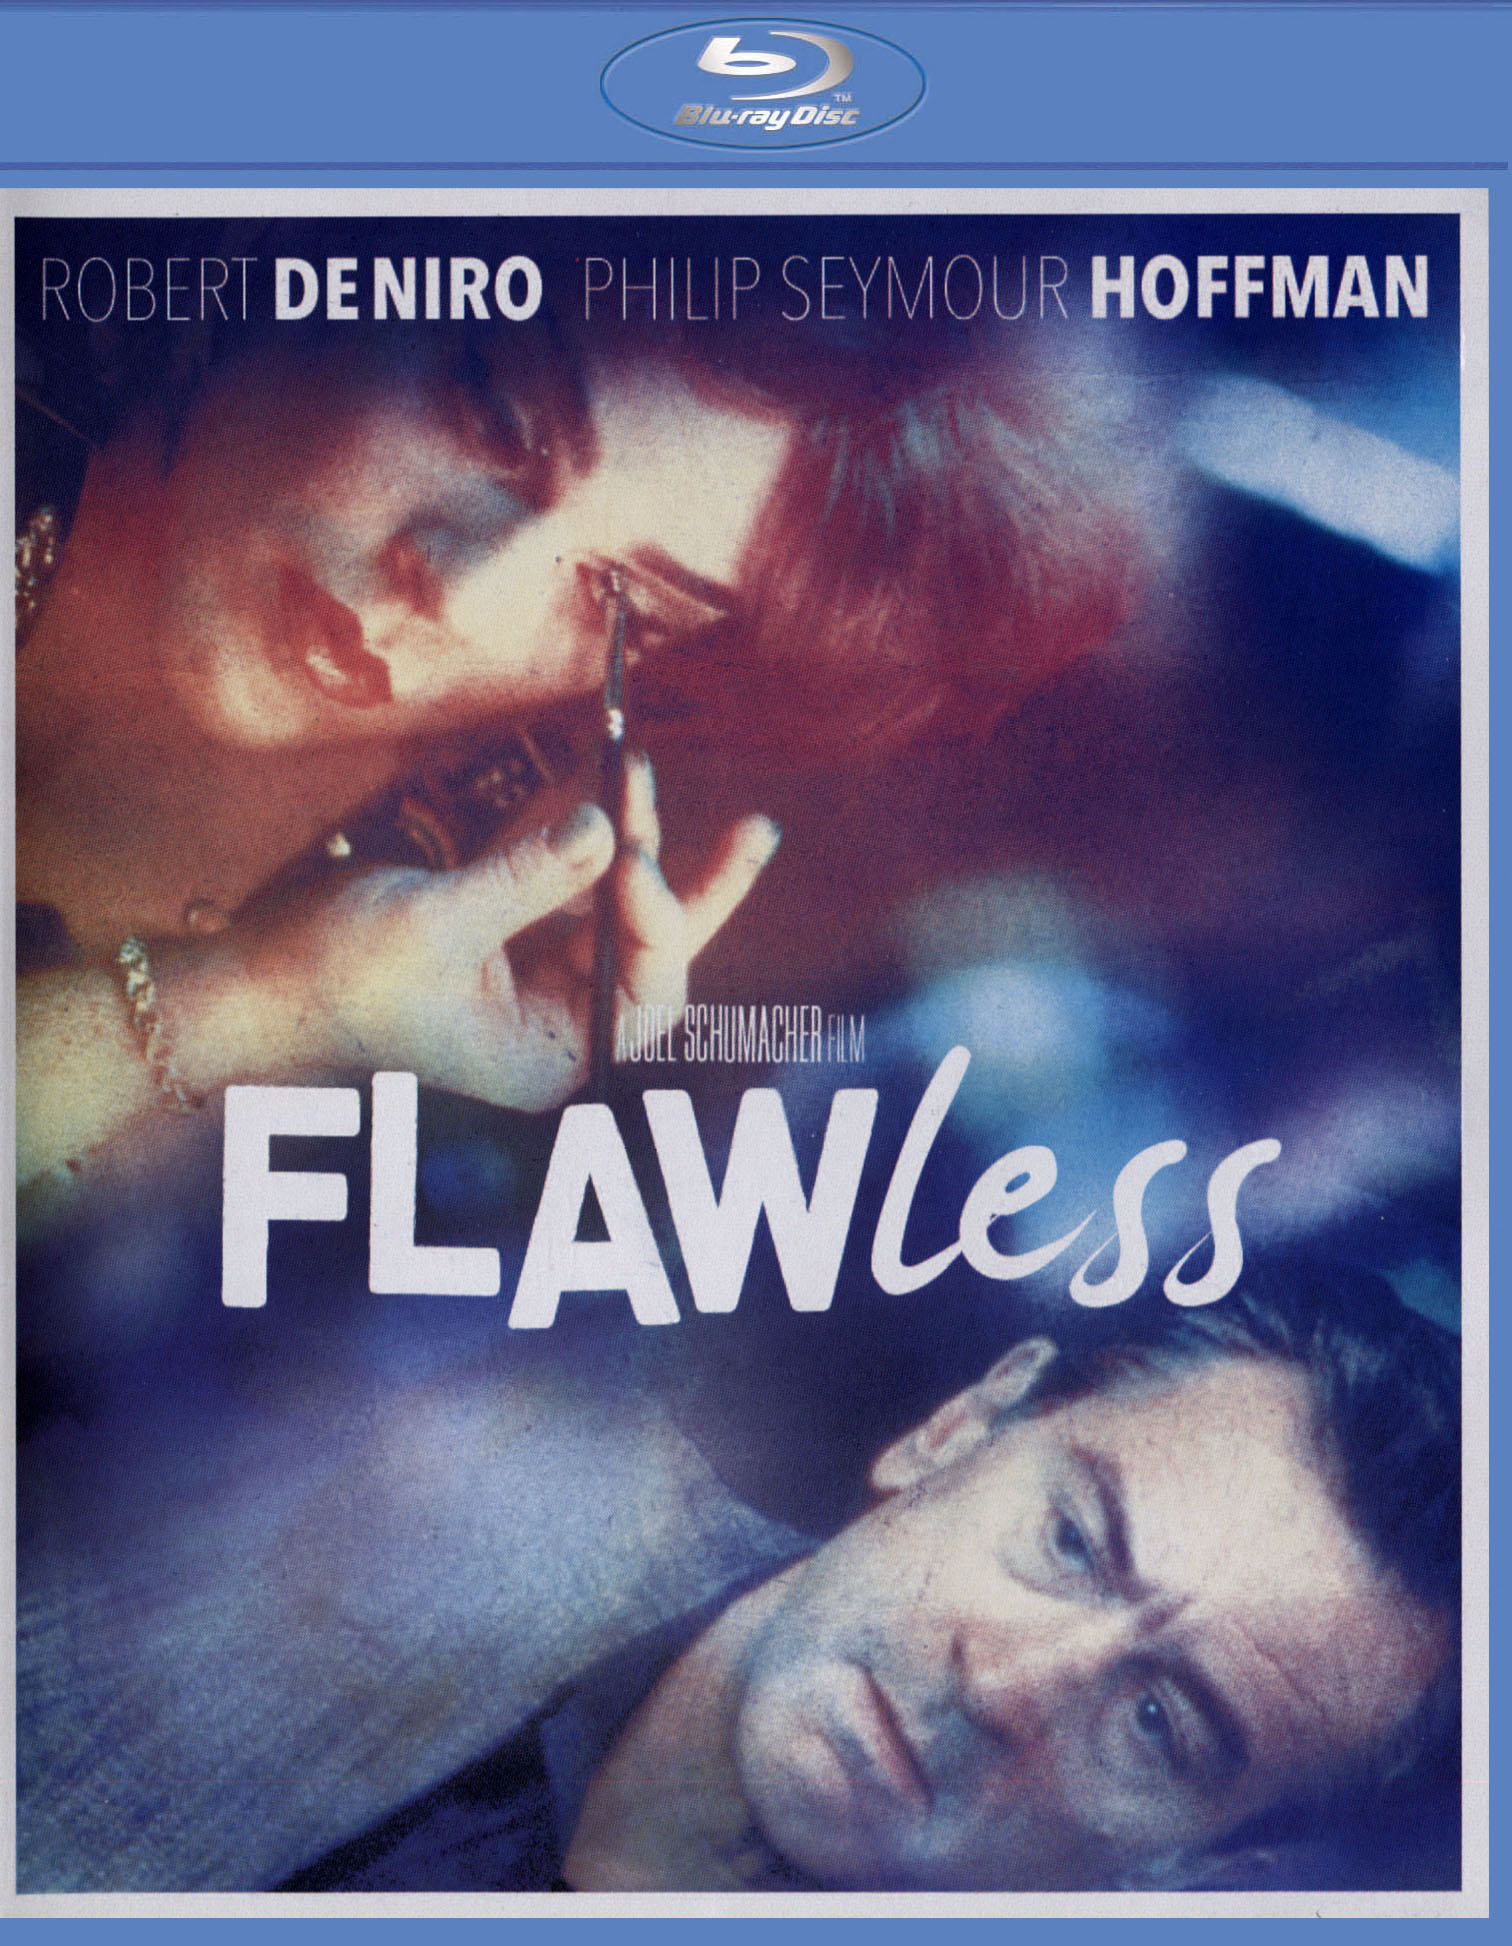 Flawless Posters for Sale